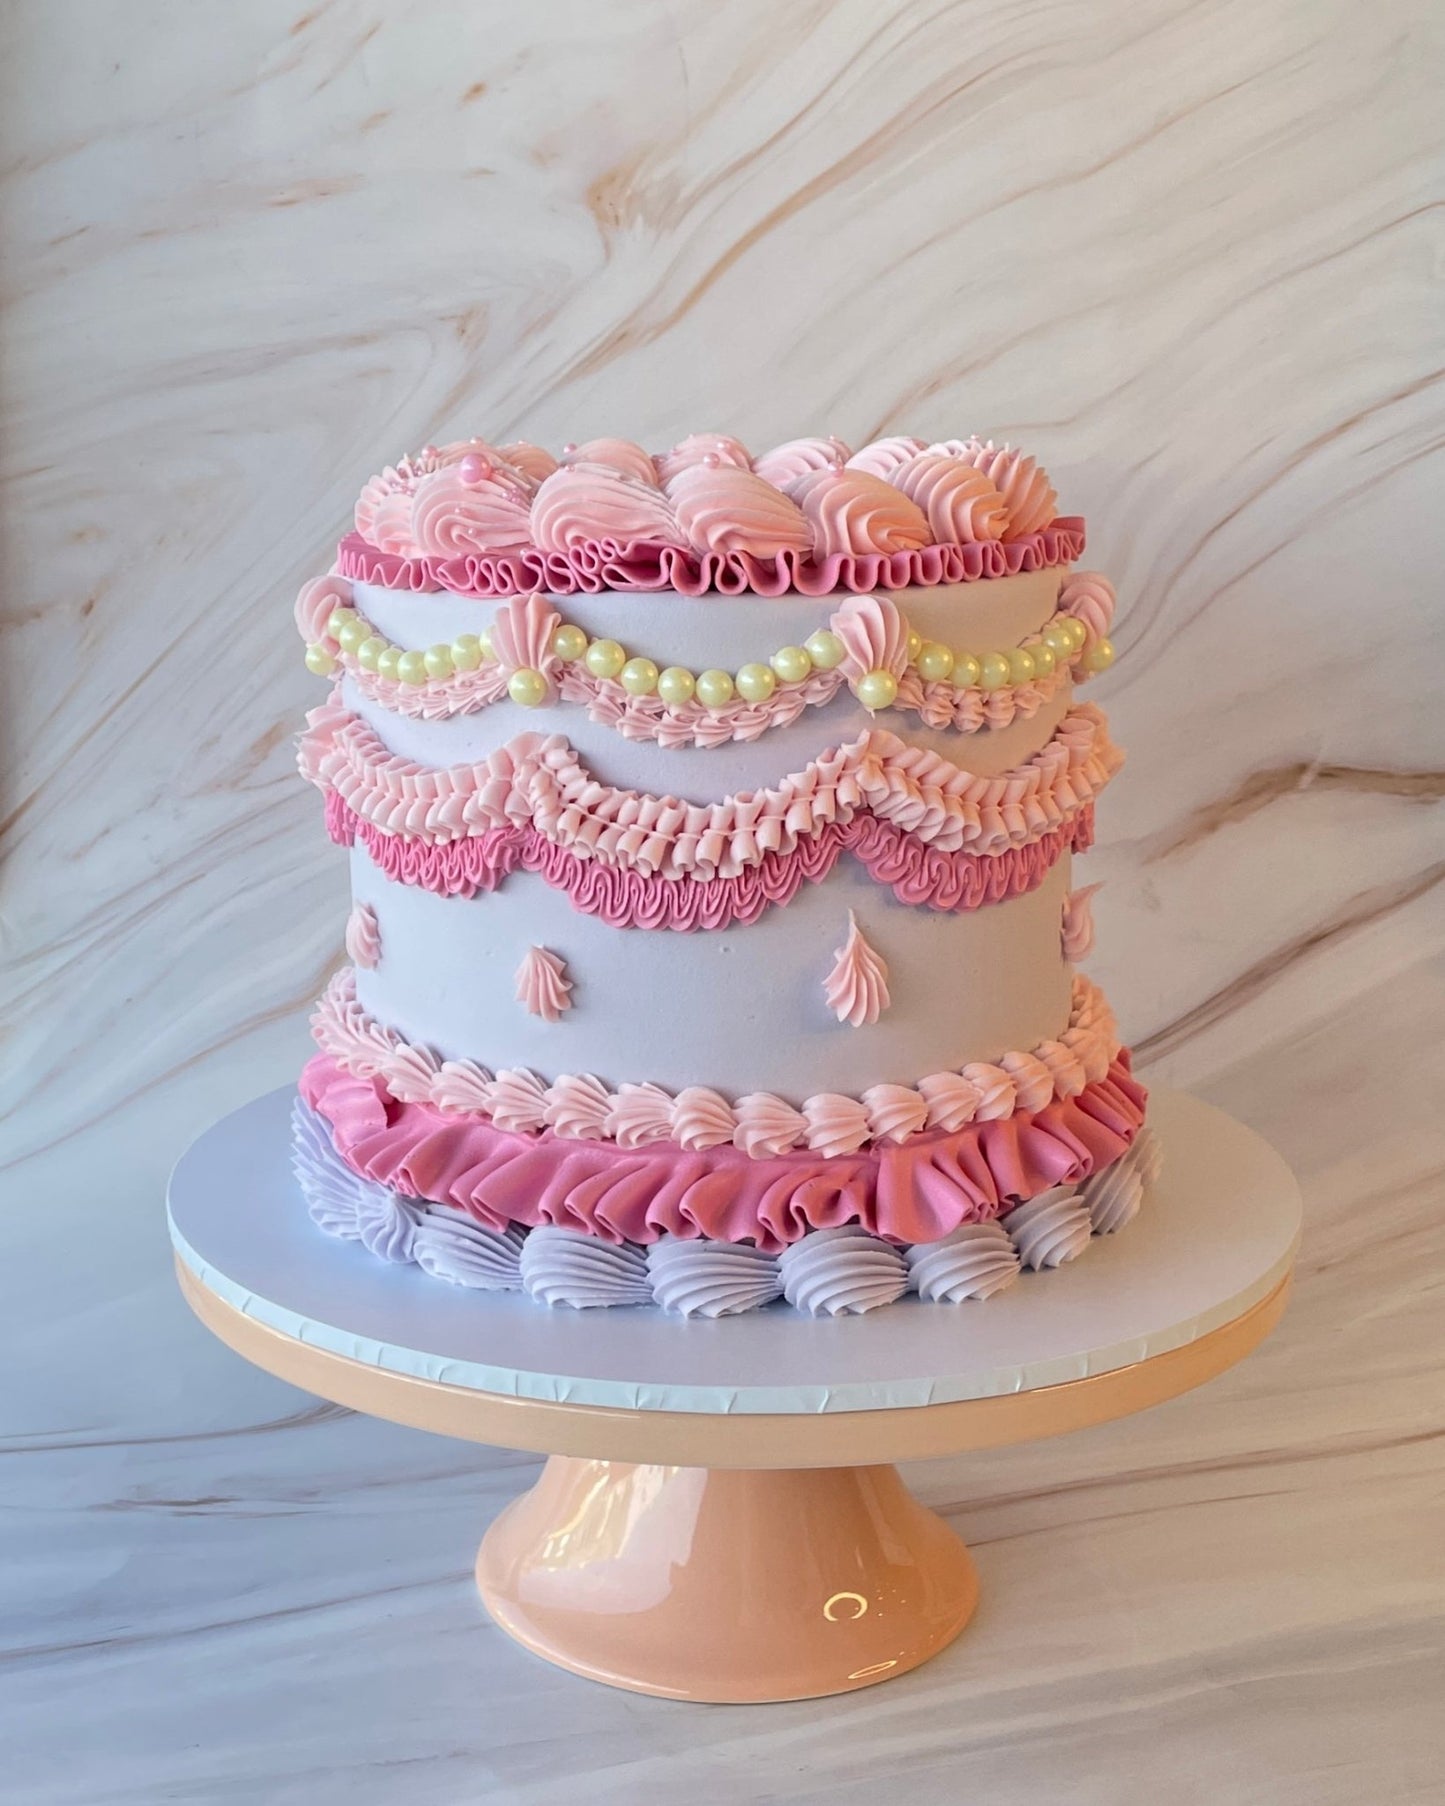 Load image into Gallery viewer, Pearls Go With Everything Vintage Cake - Flour Lane
